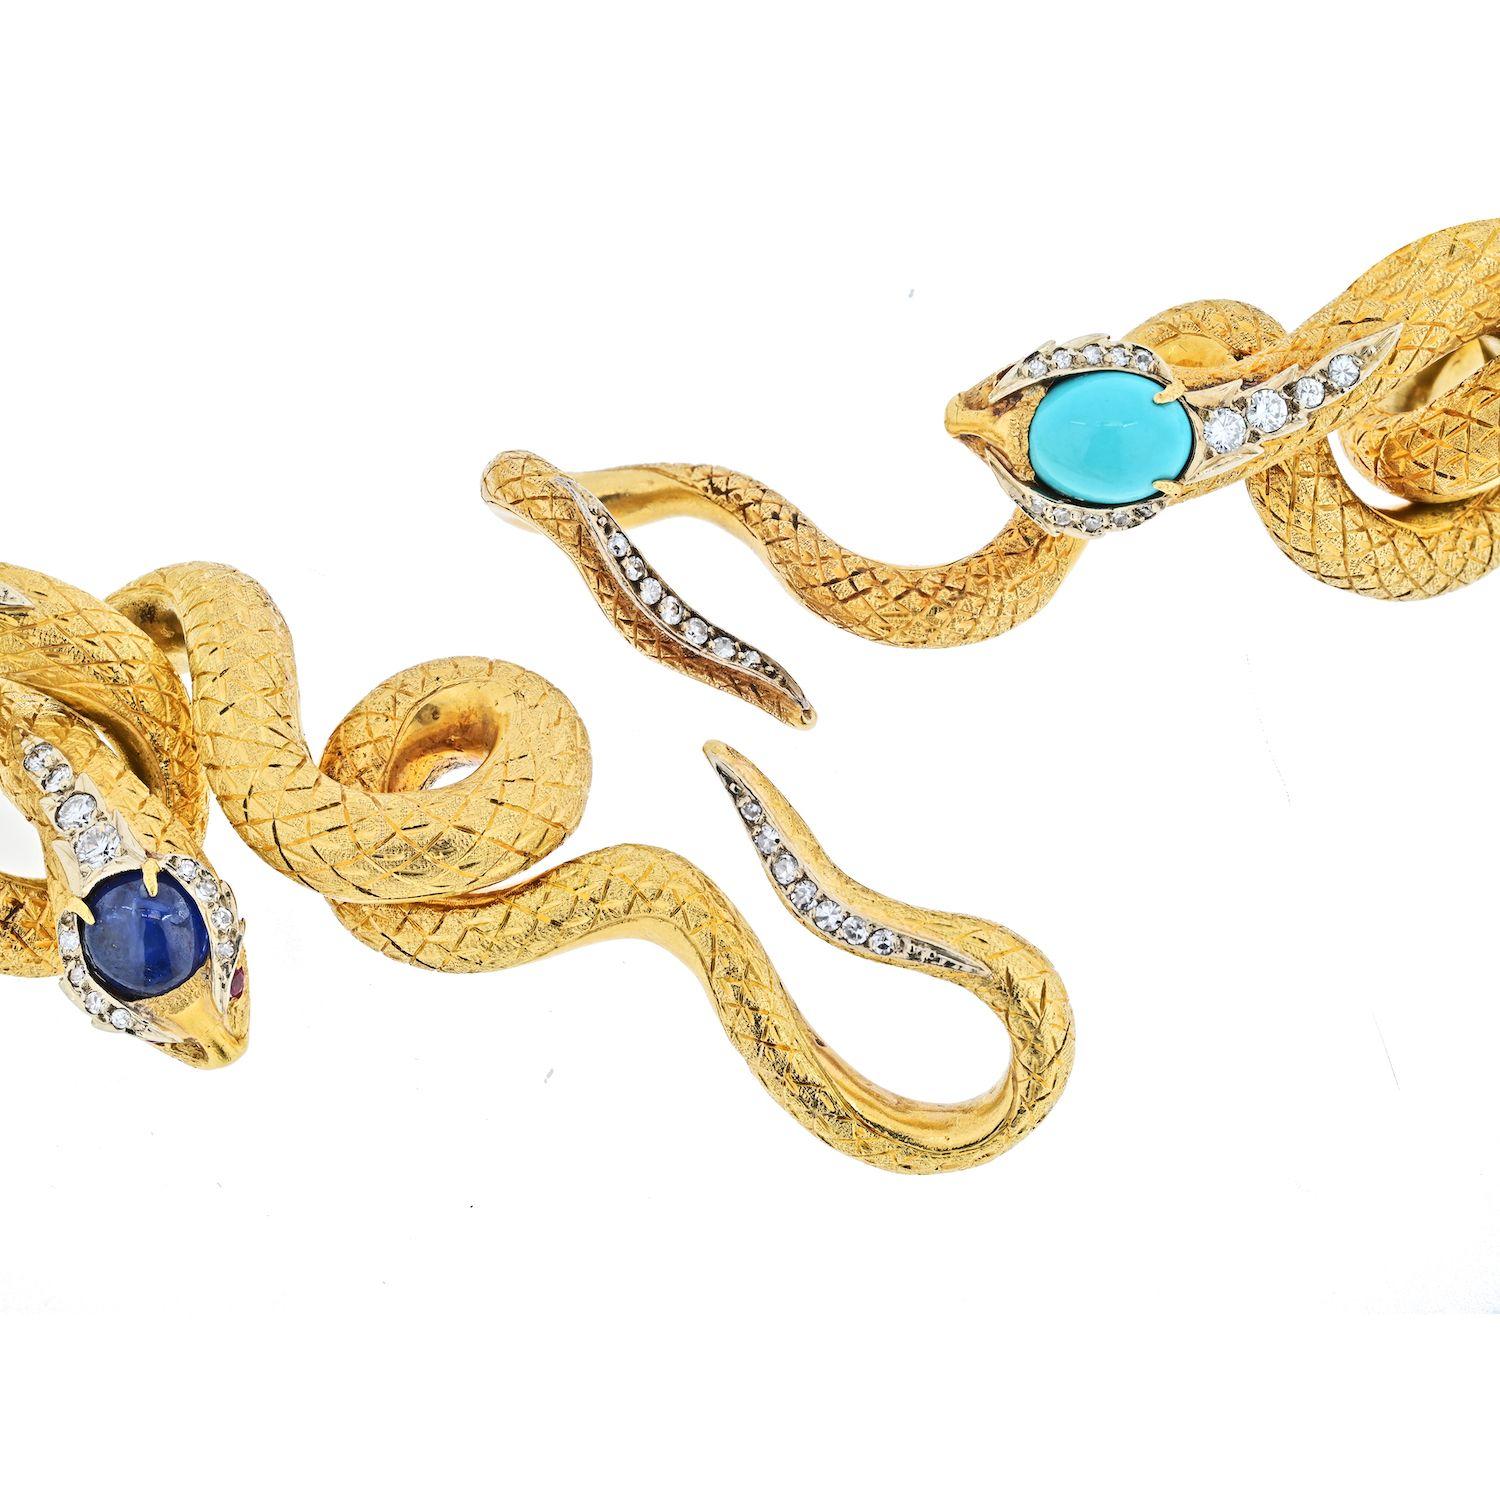 Modern 18K Yellow Gold Articulated Snakes with Turquoise, Lapis and Diamond Necklace